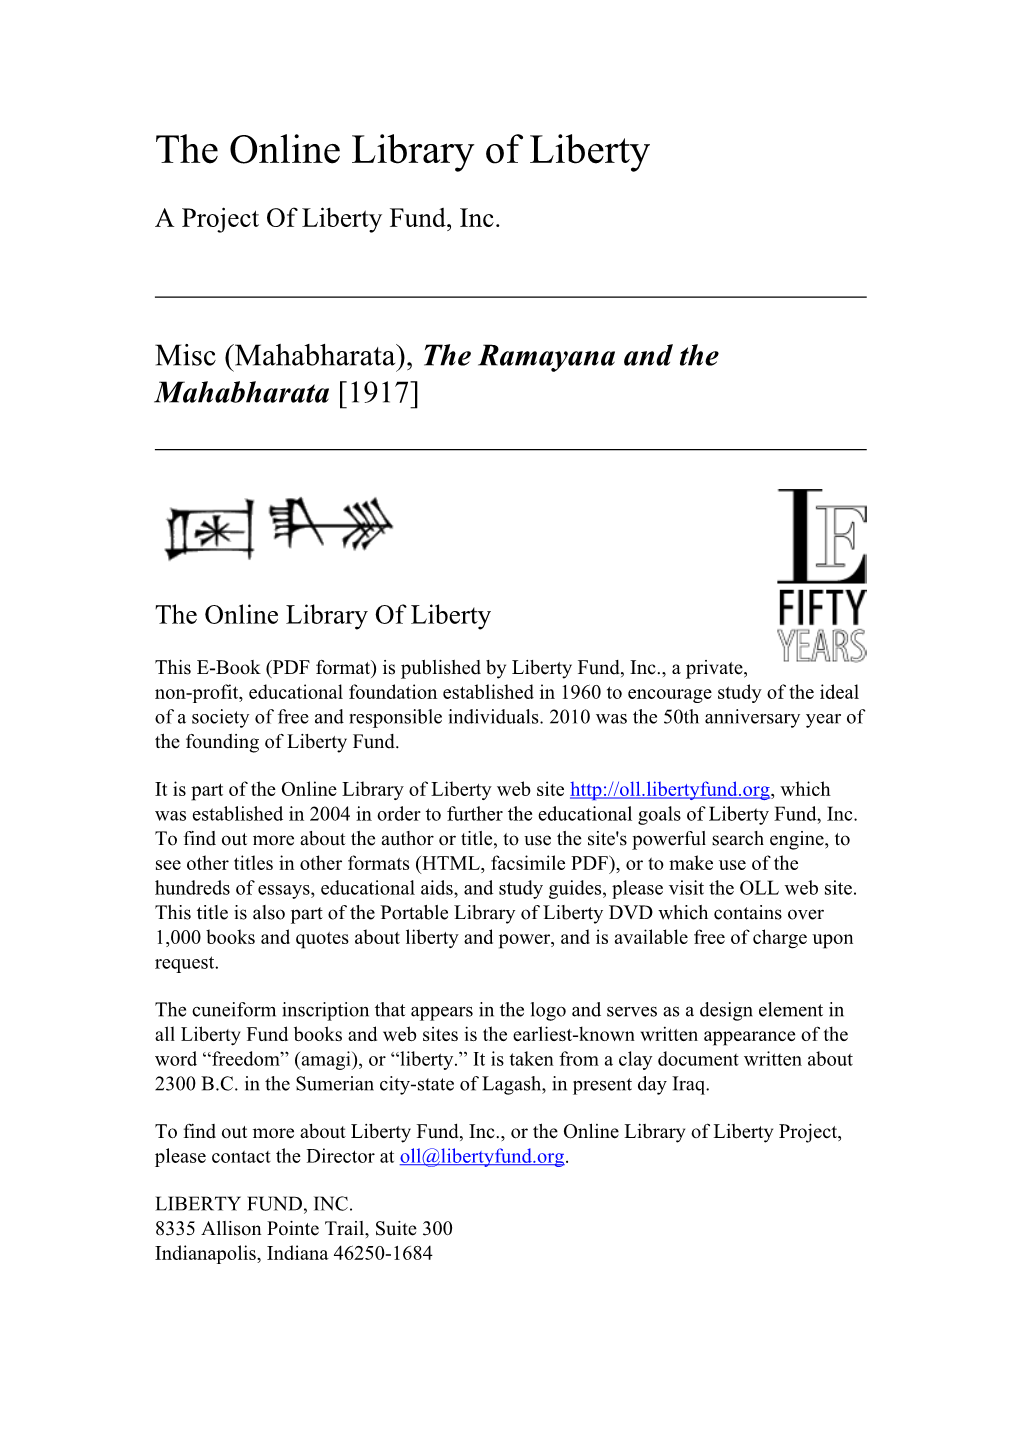 Online Library of Liberty: the Ramayana and the Mahabharata